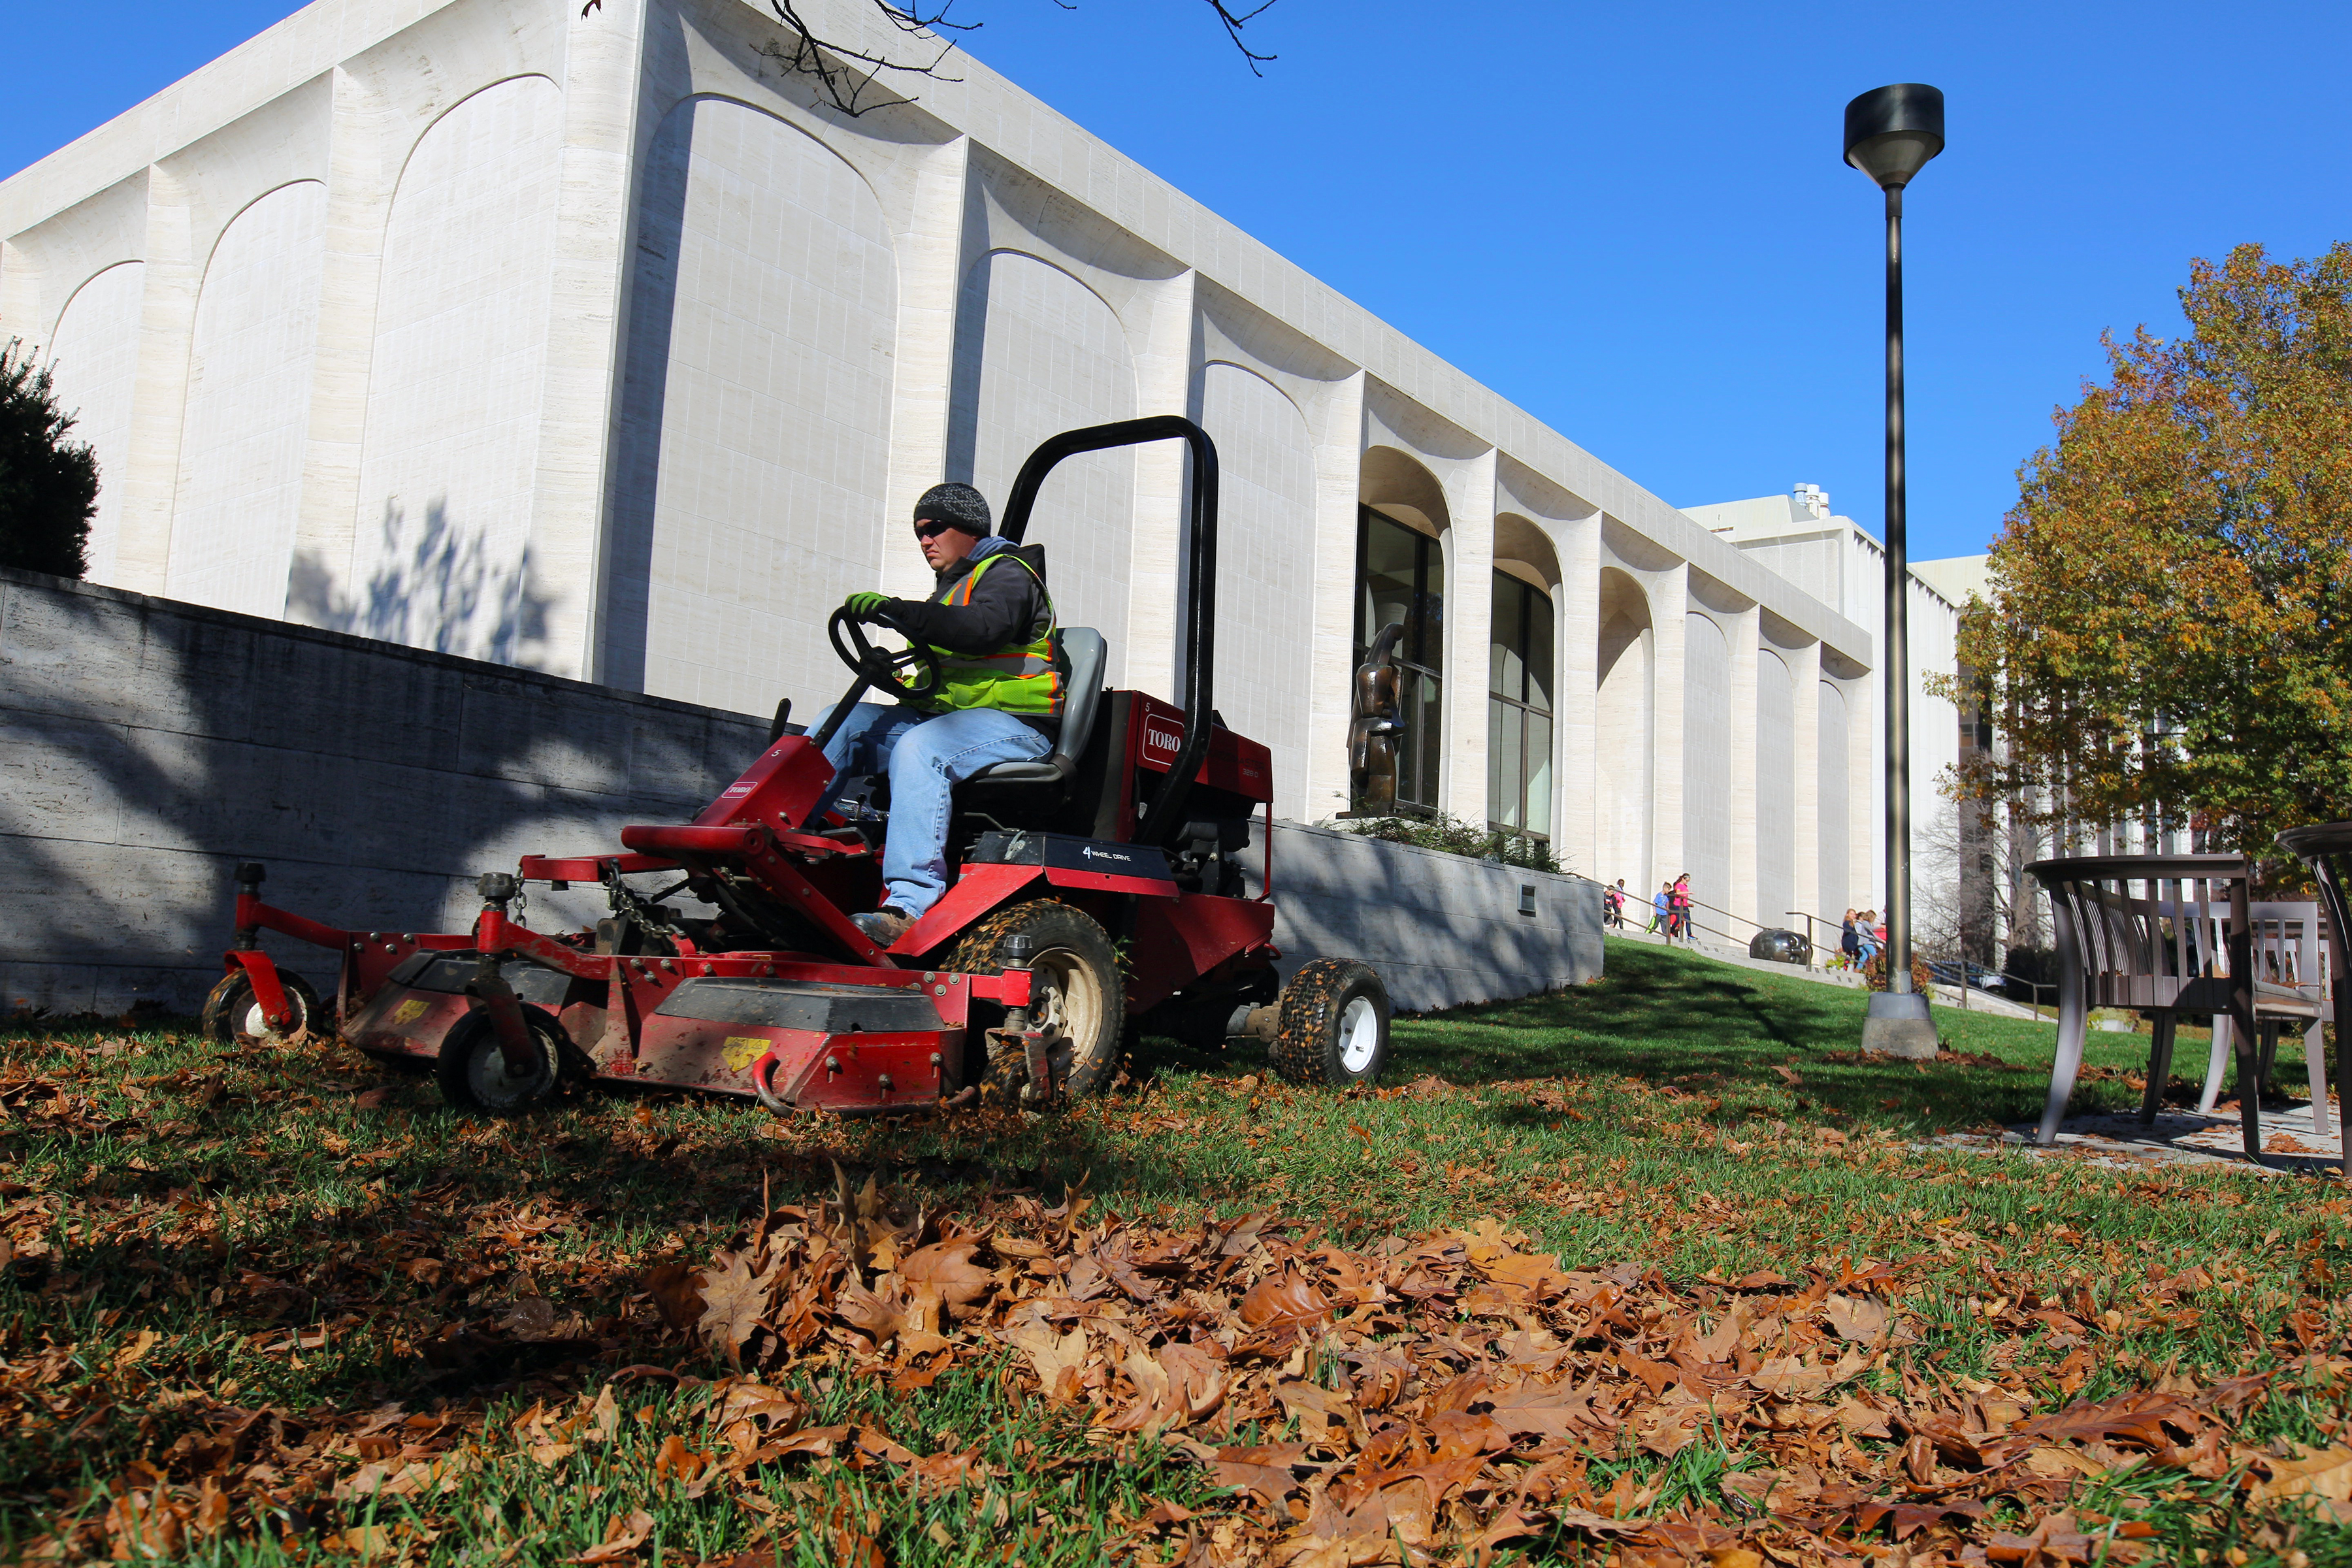 Tim Herron, a landscape assistant with landscape services, mulches leaves into the grass on the east side of Sheldon Museum of Art on Nov. 8. The university recently expanded its sustainability practices by partnering with Big Red Worms on leaf recycling.